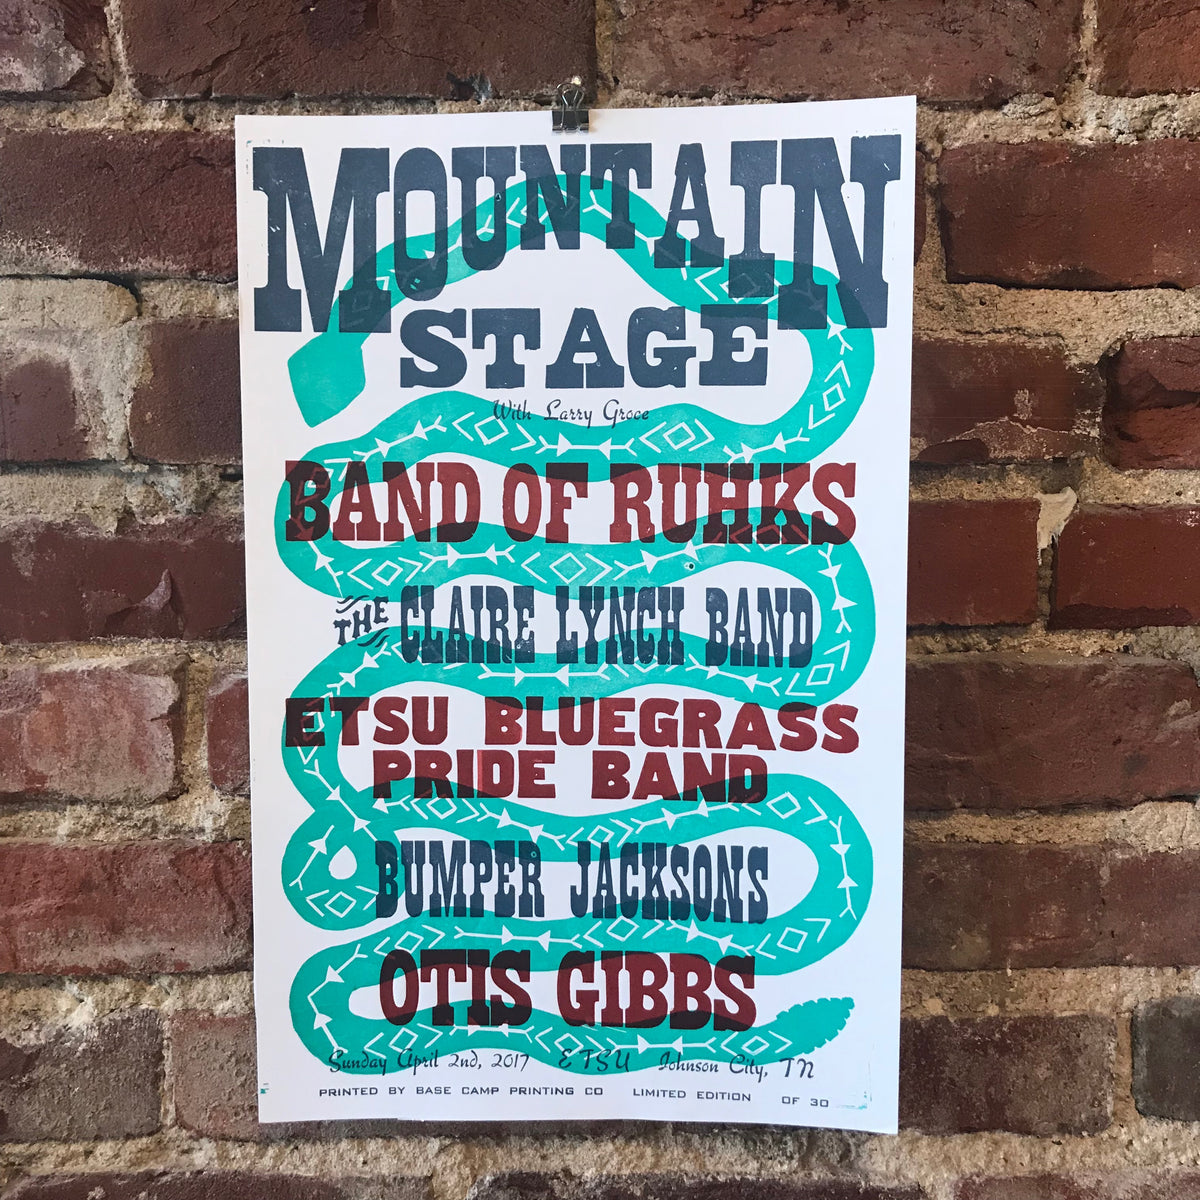 April 2nd, 2017 Mountain Stage Poster